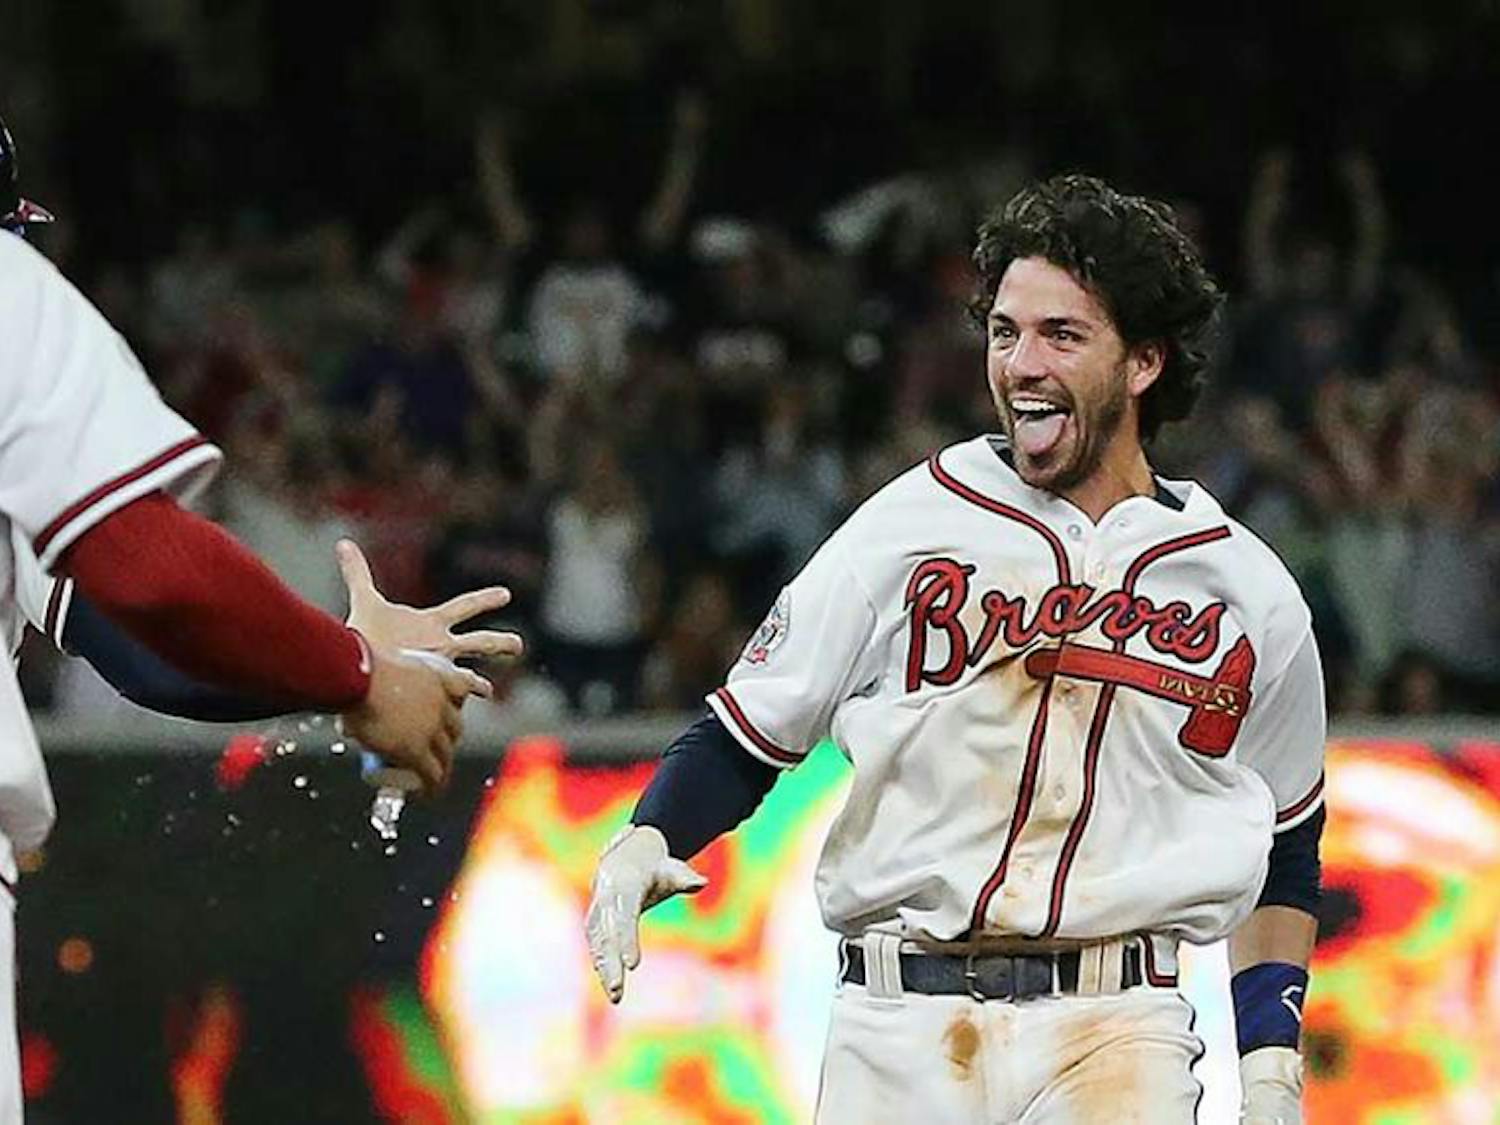 Dansby Swanson celebrating after his walk-off single.​ Photo via AJC.com.